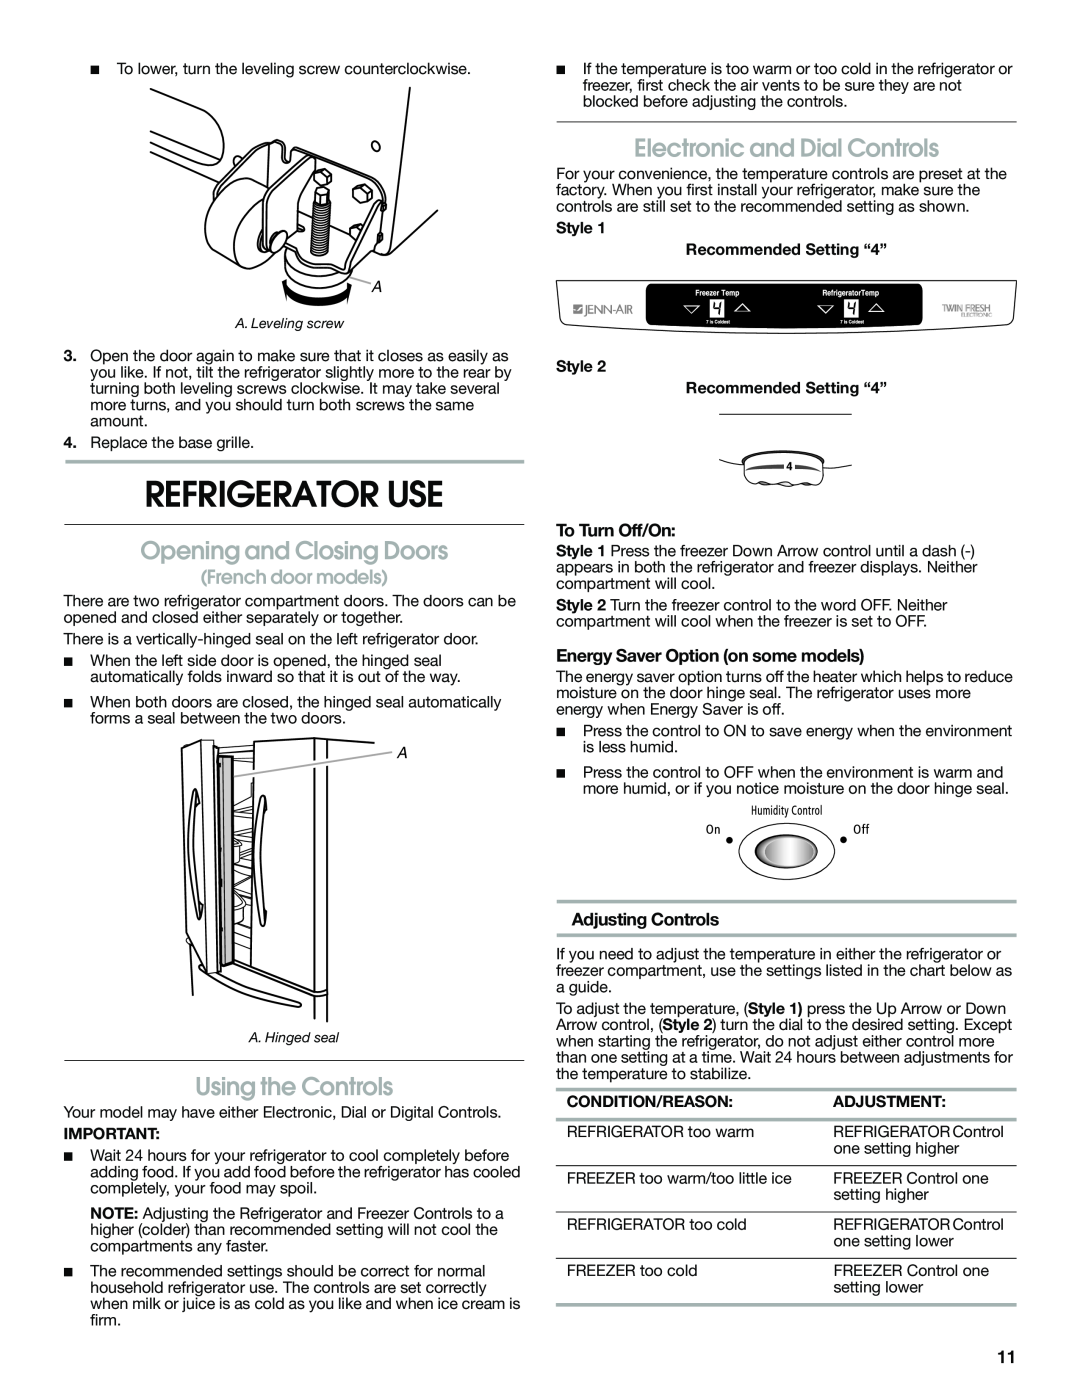 Jenn-Air JFC2089WEM Refrigerator Use, Electronic and Dial Controls, Opening and Closing Doors, Using the Controls 